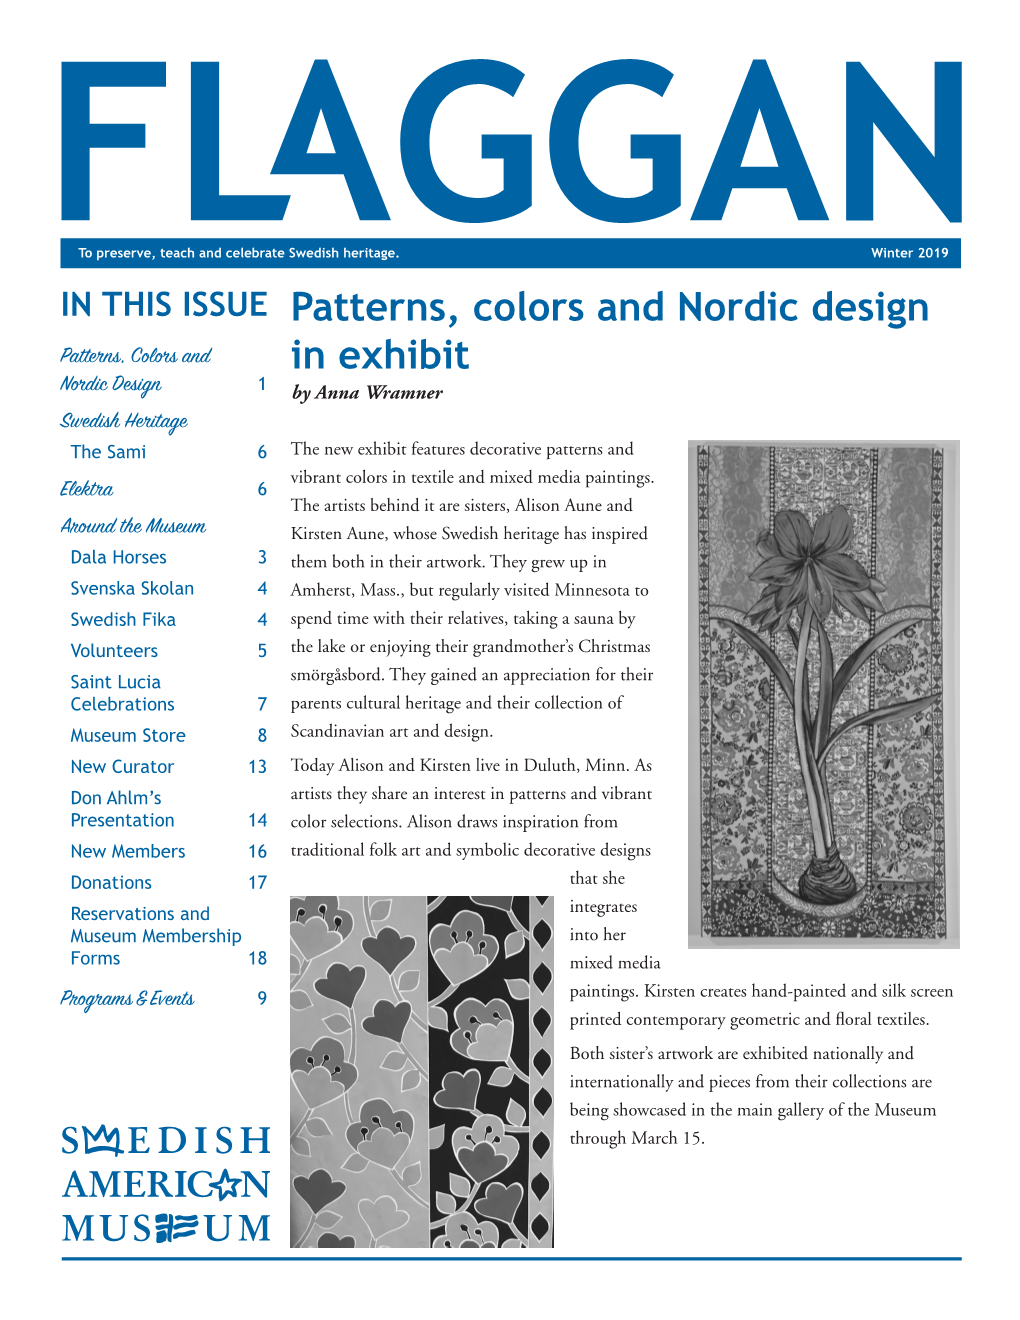 Patterns, Colors and Nordic Design in Exhibit